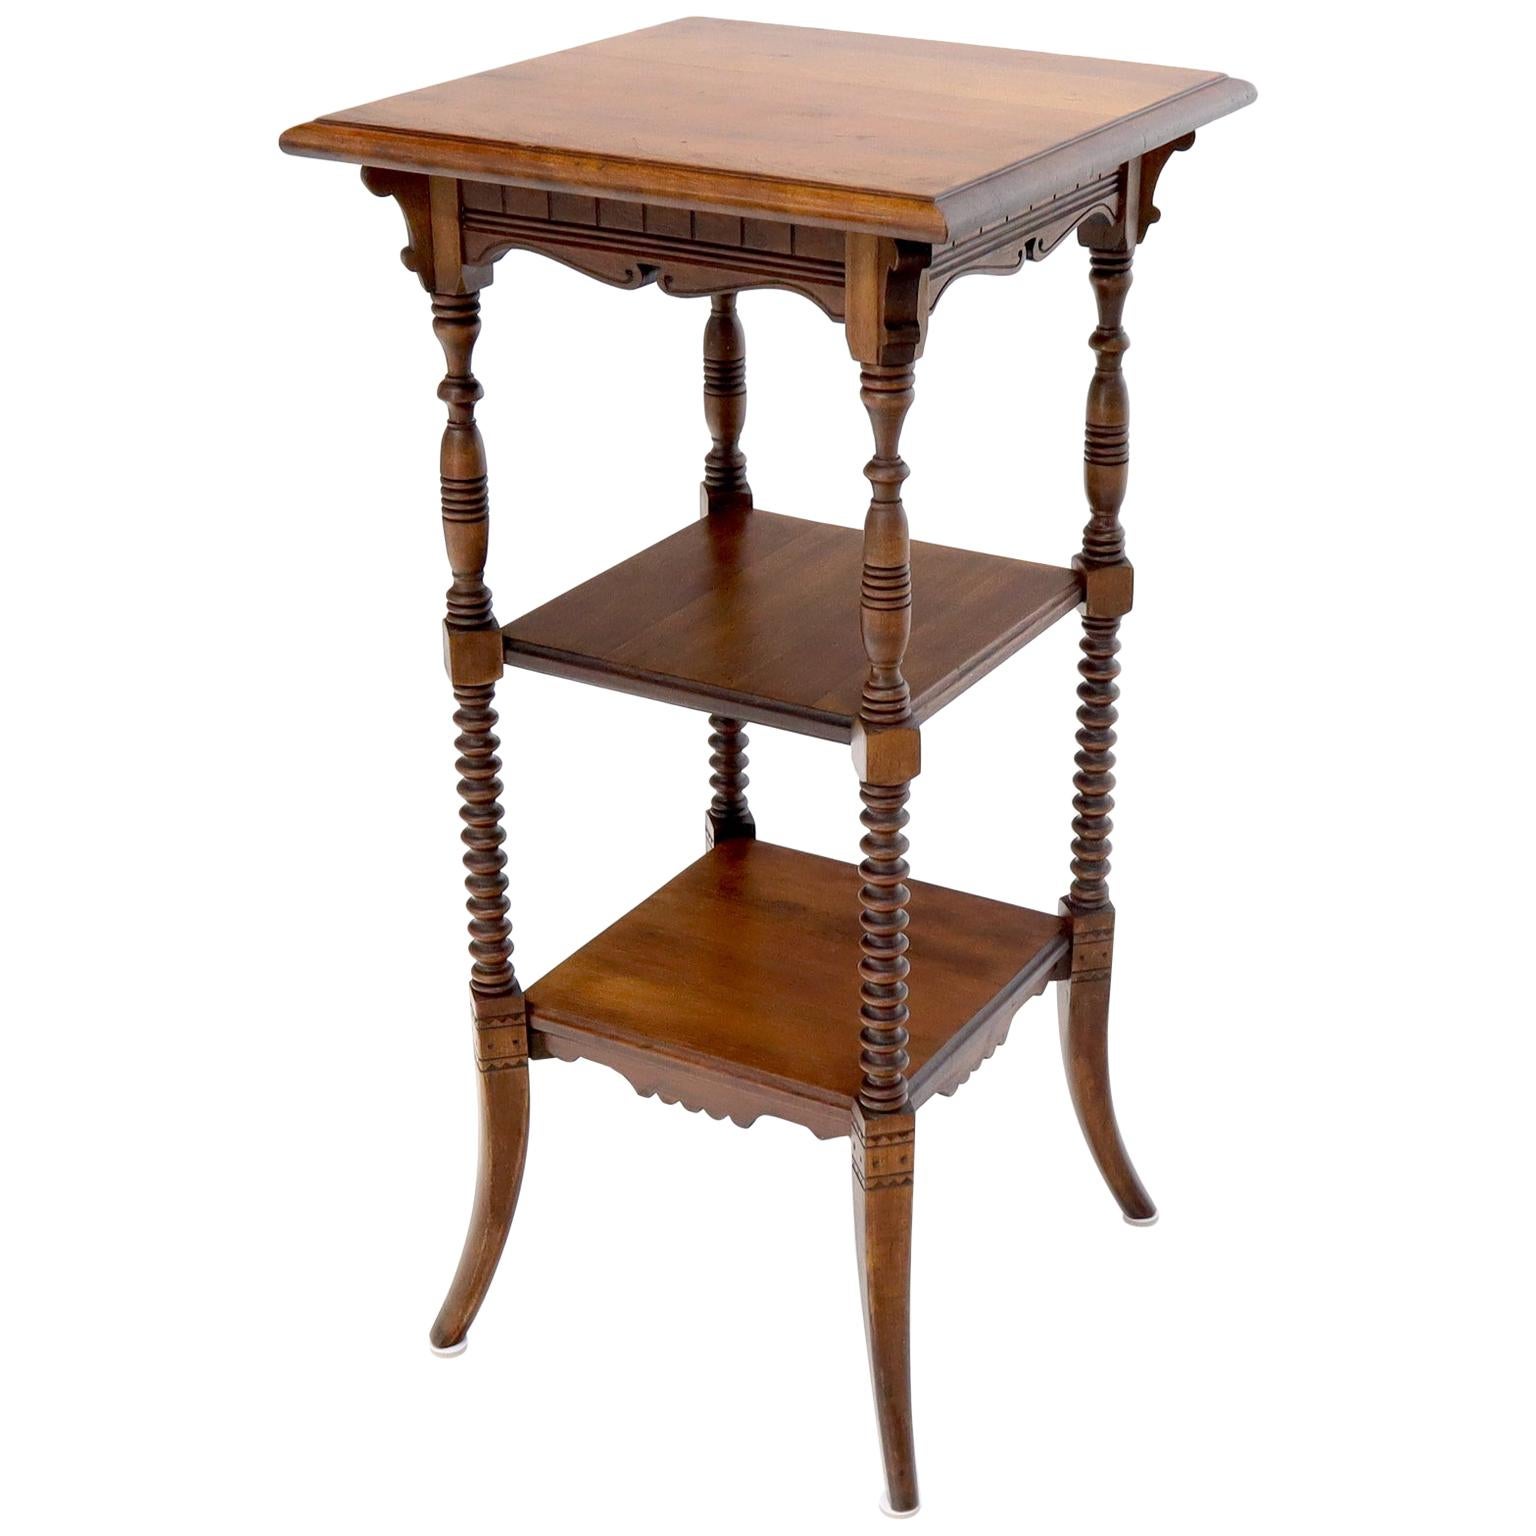 Victorian Square Three-Tier Stand Corner Lamp Occasional Table Stand